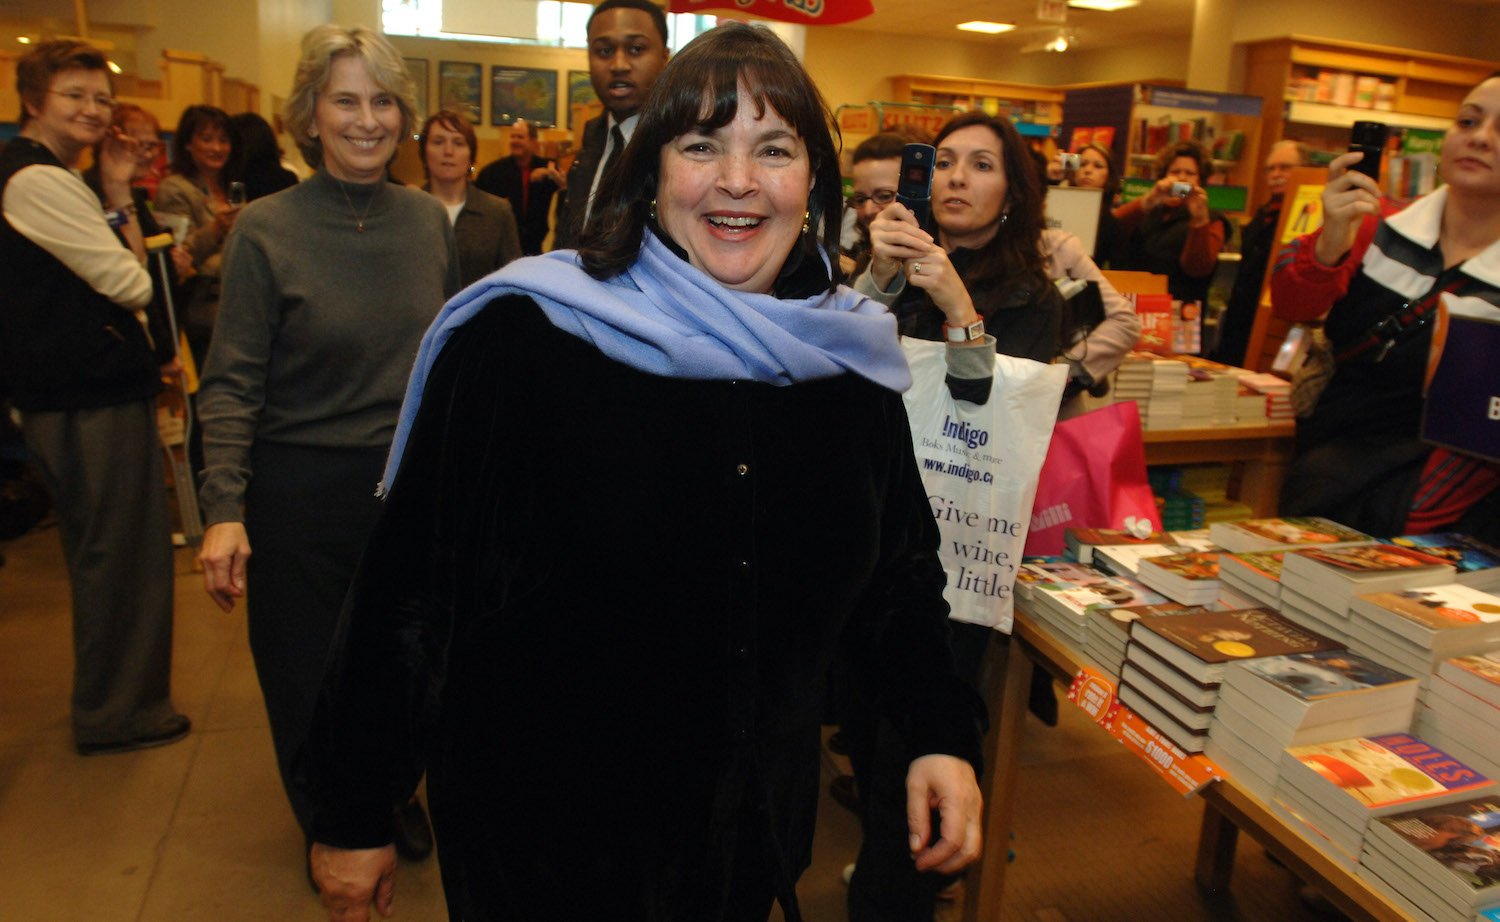 Barefoot Contessa Ina Garten smiles at a book signing with fans behind her